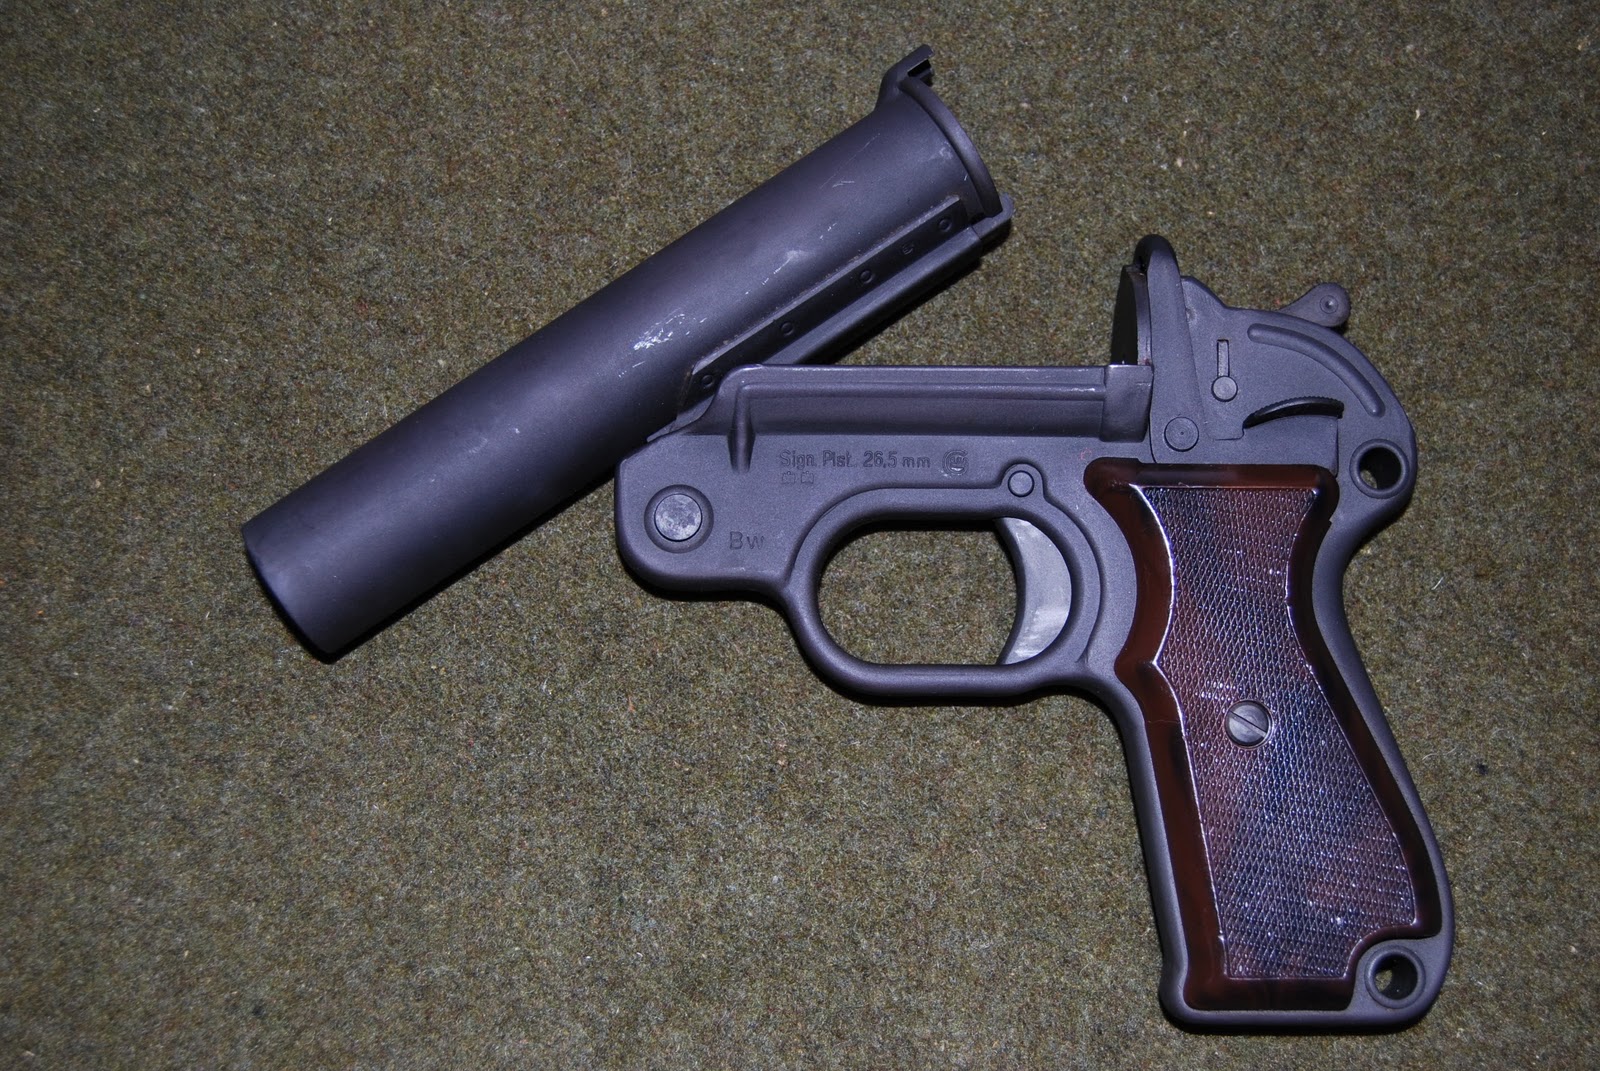 Both are military surplus 26.5mm flare pistols. 